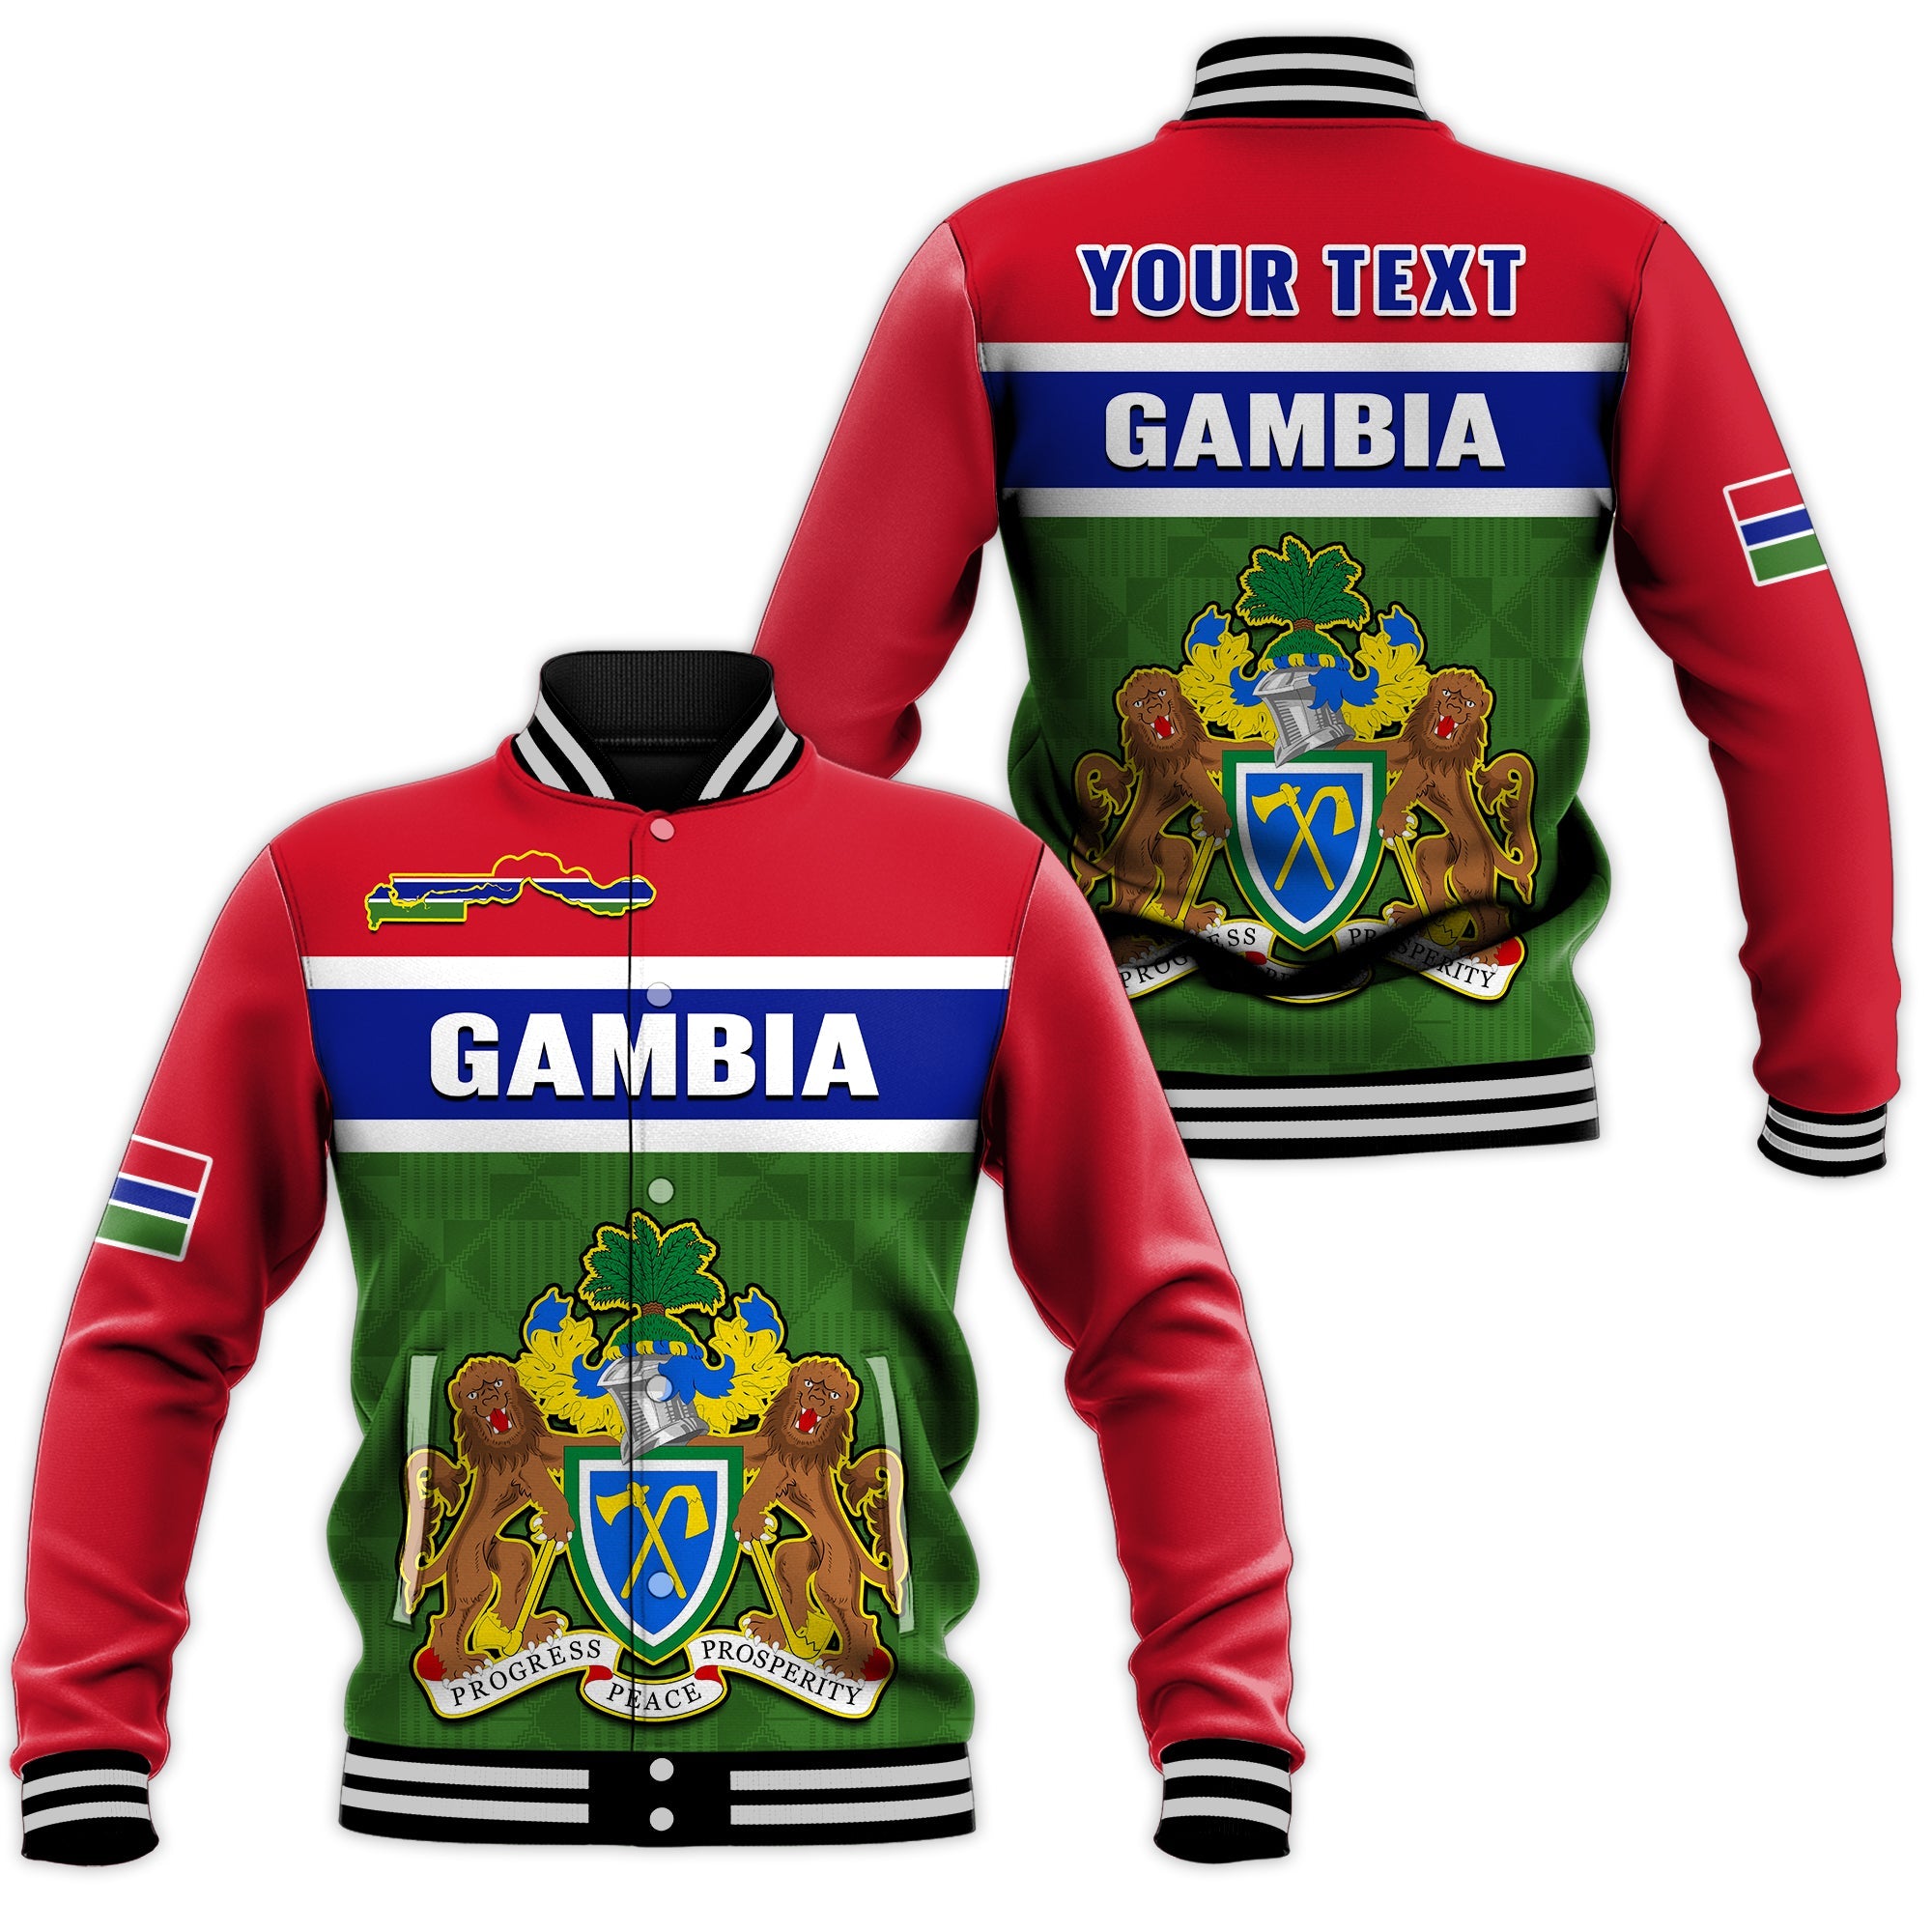 custom-personalised-gambia-baseball-jacket-happy-58th-independence-anniversary-flag-style